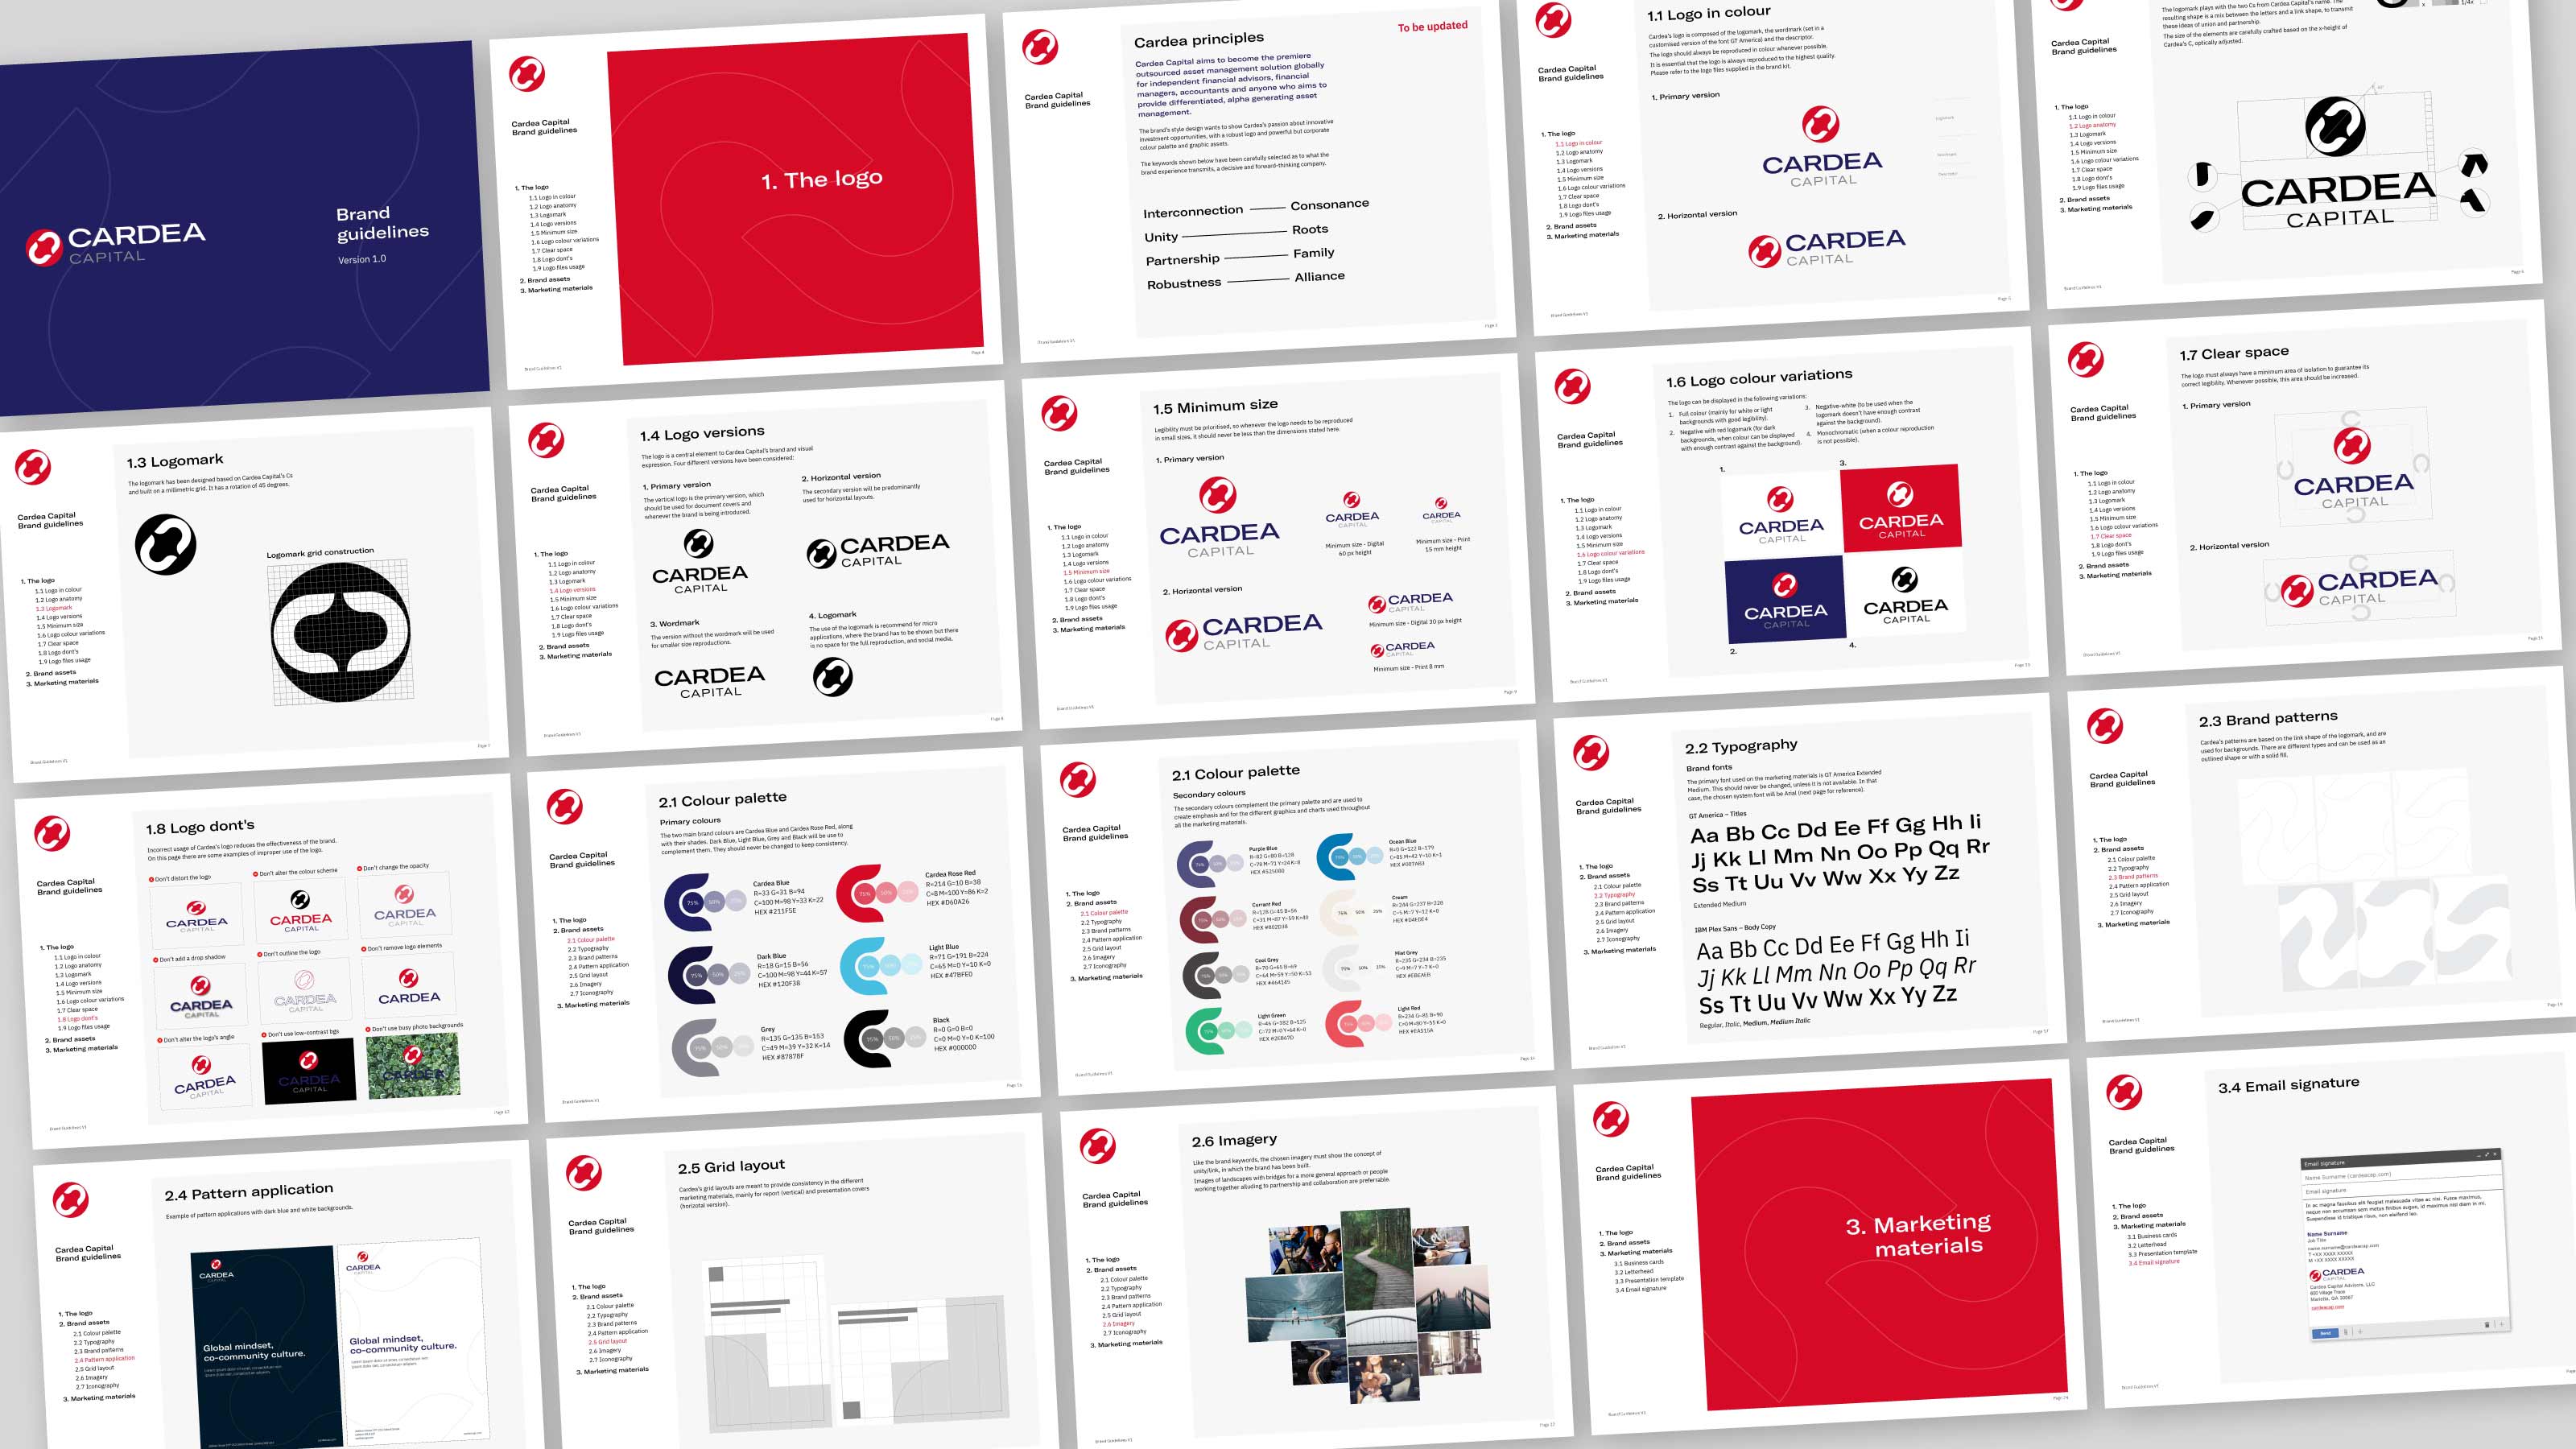 Example of different slides from the brand guidelines designed.